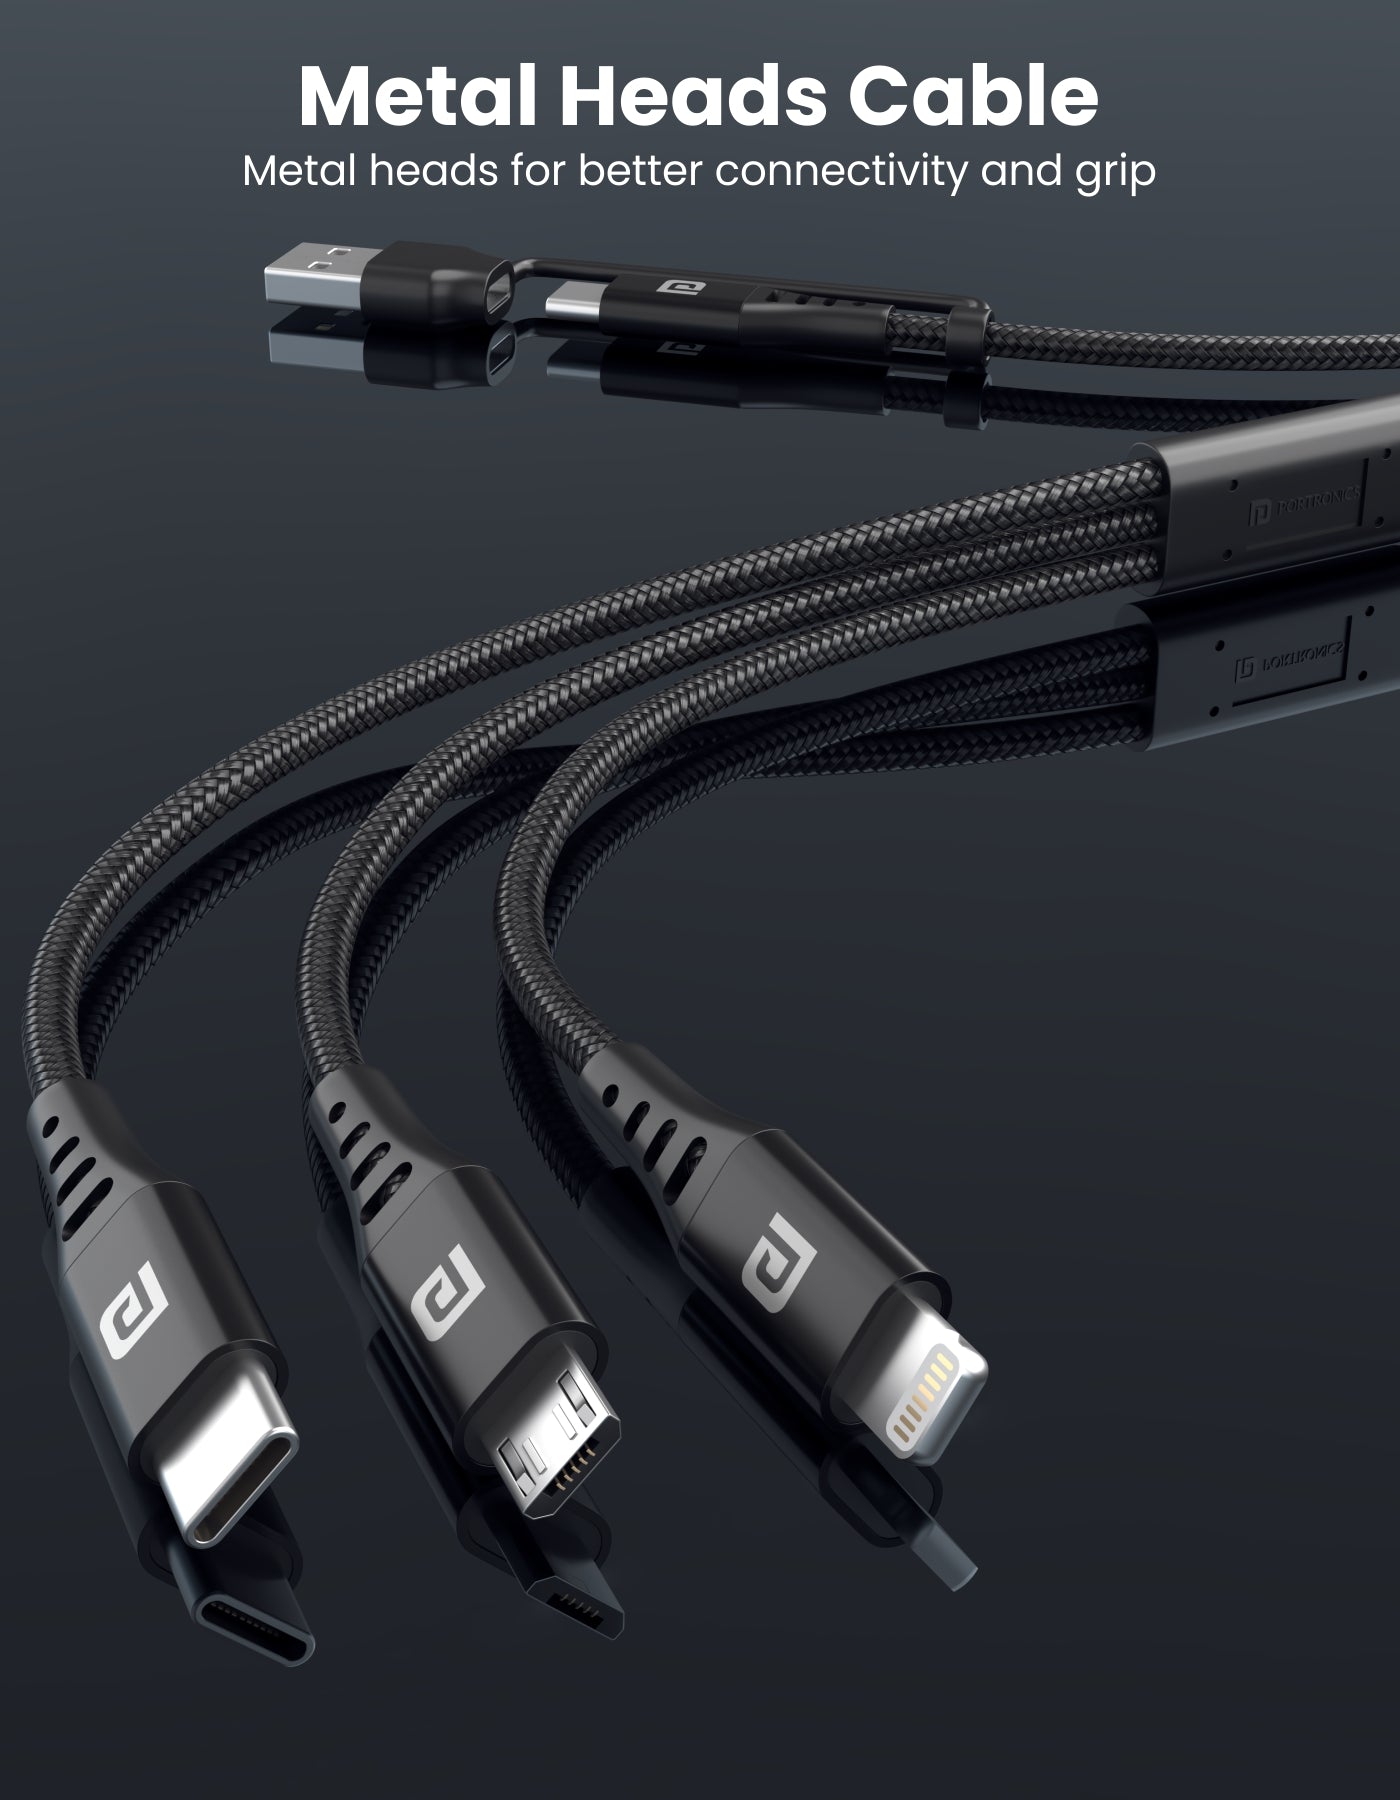 Portronics Konnect Core Plus Micro USB Cable and fast charging cable